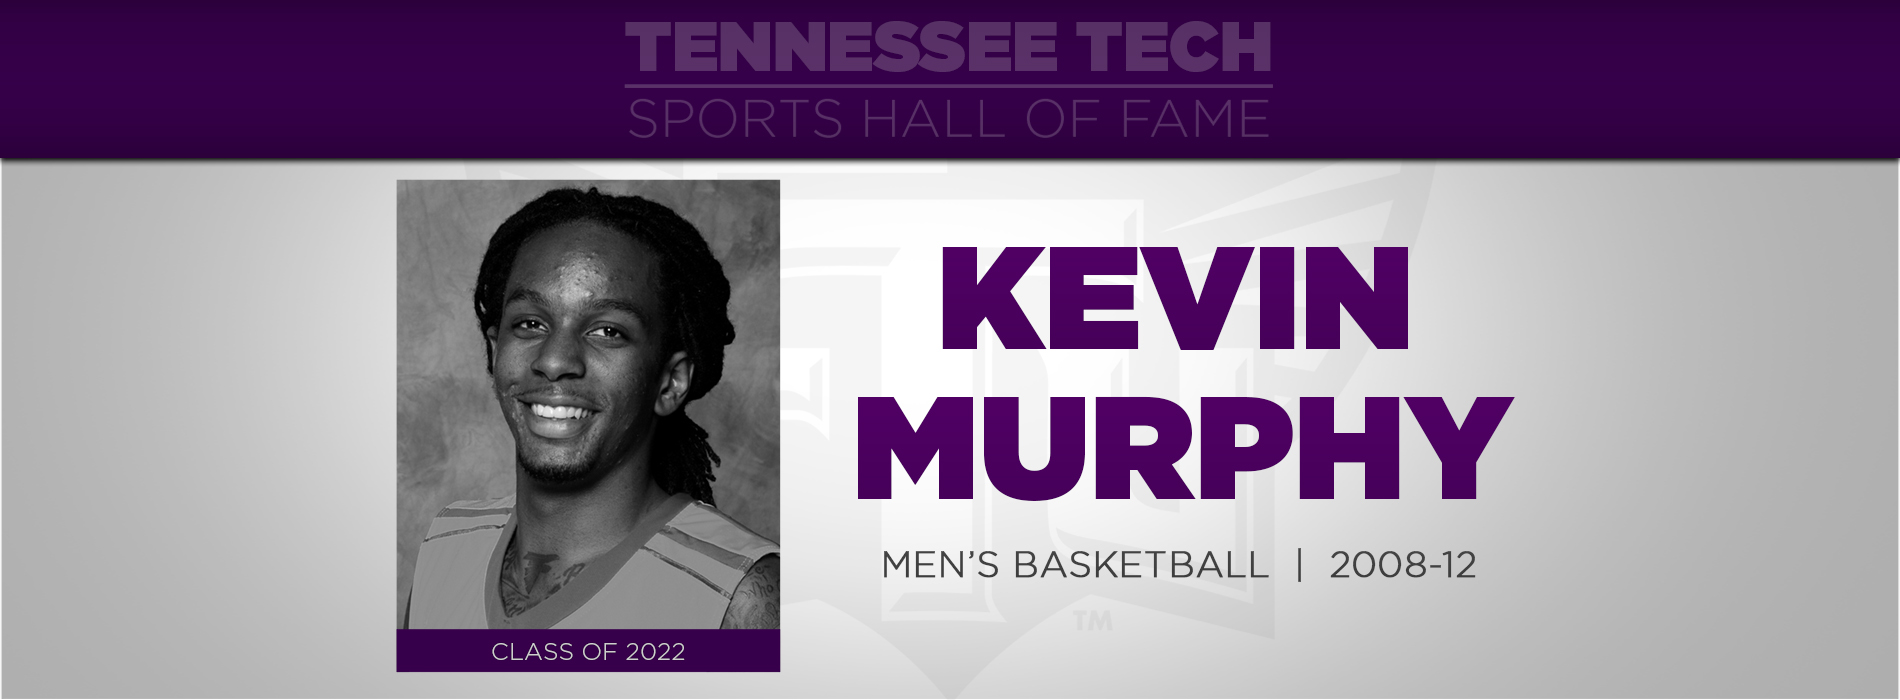 Murphy to be inducted into TTU Sports Hall of Fame Friday, Nov. 4